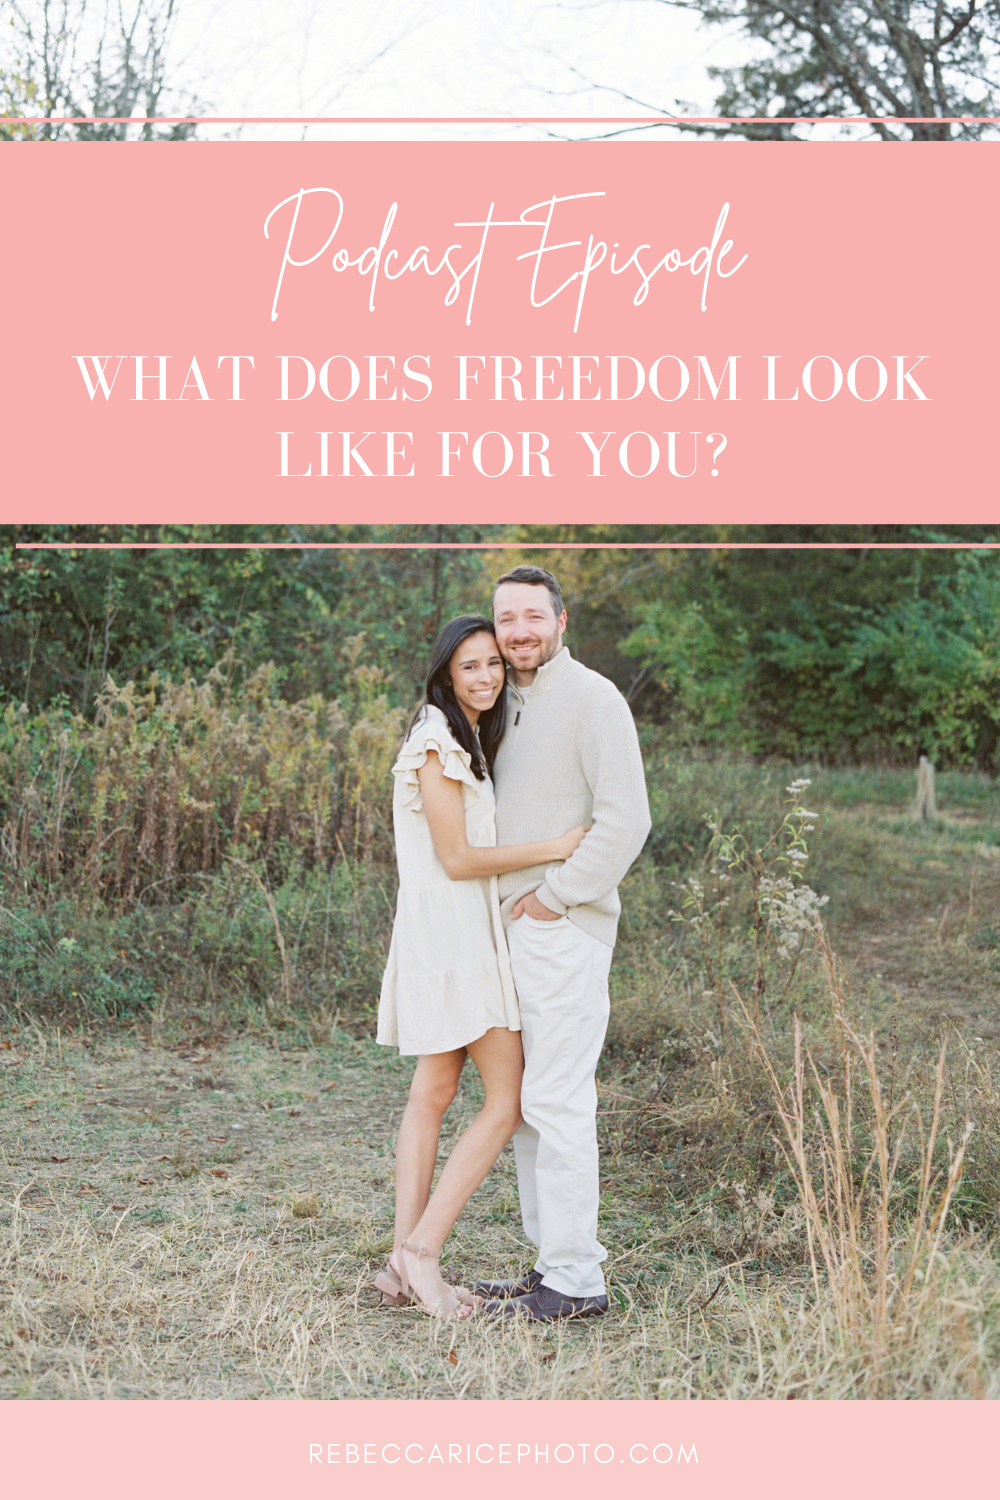 What Does Freedom Look Like For You? | Business Owner Tips